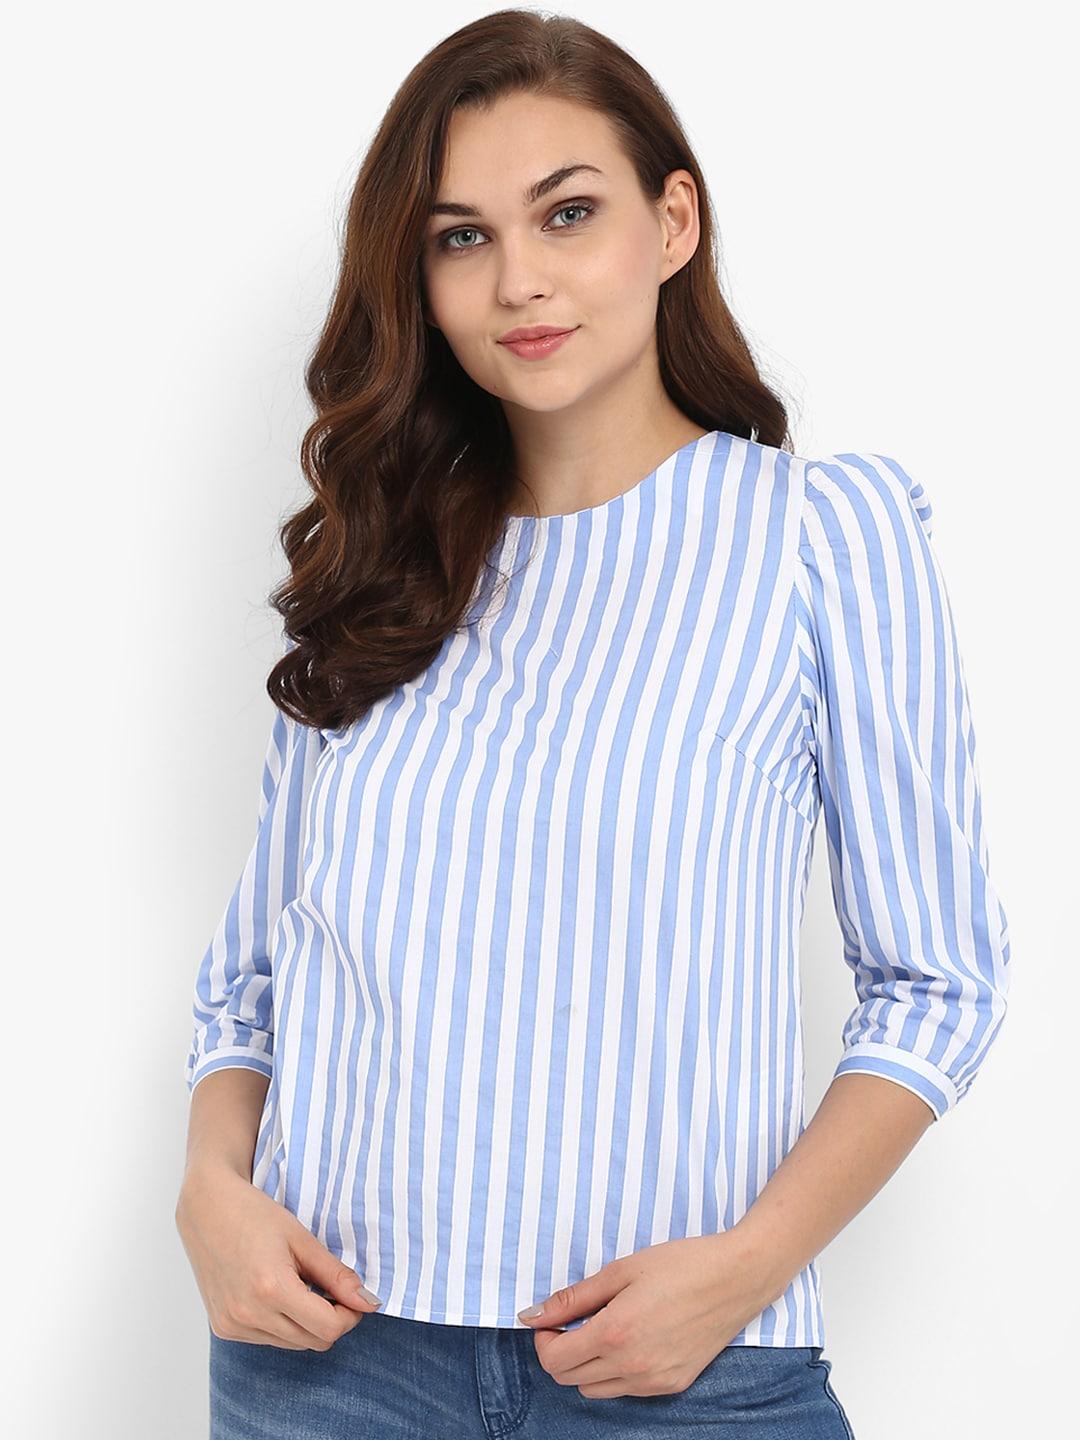 athah-white-&-blue-striped-top